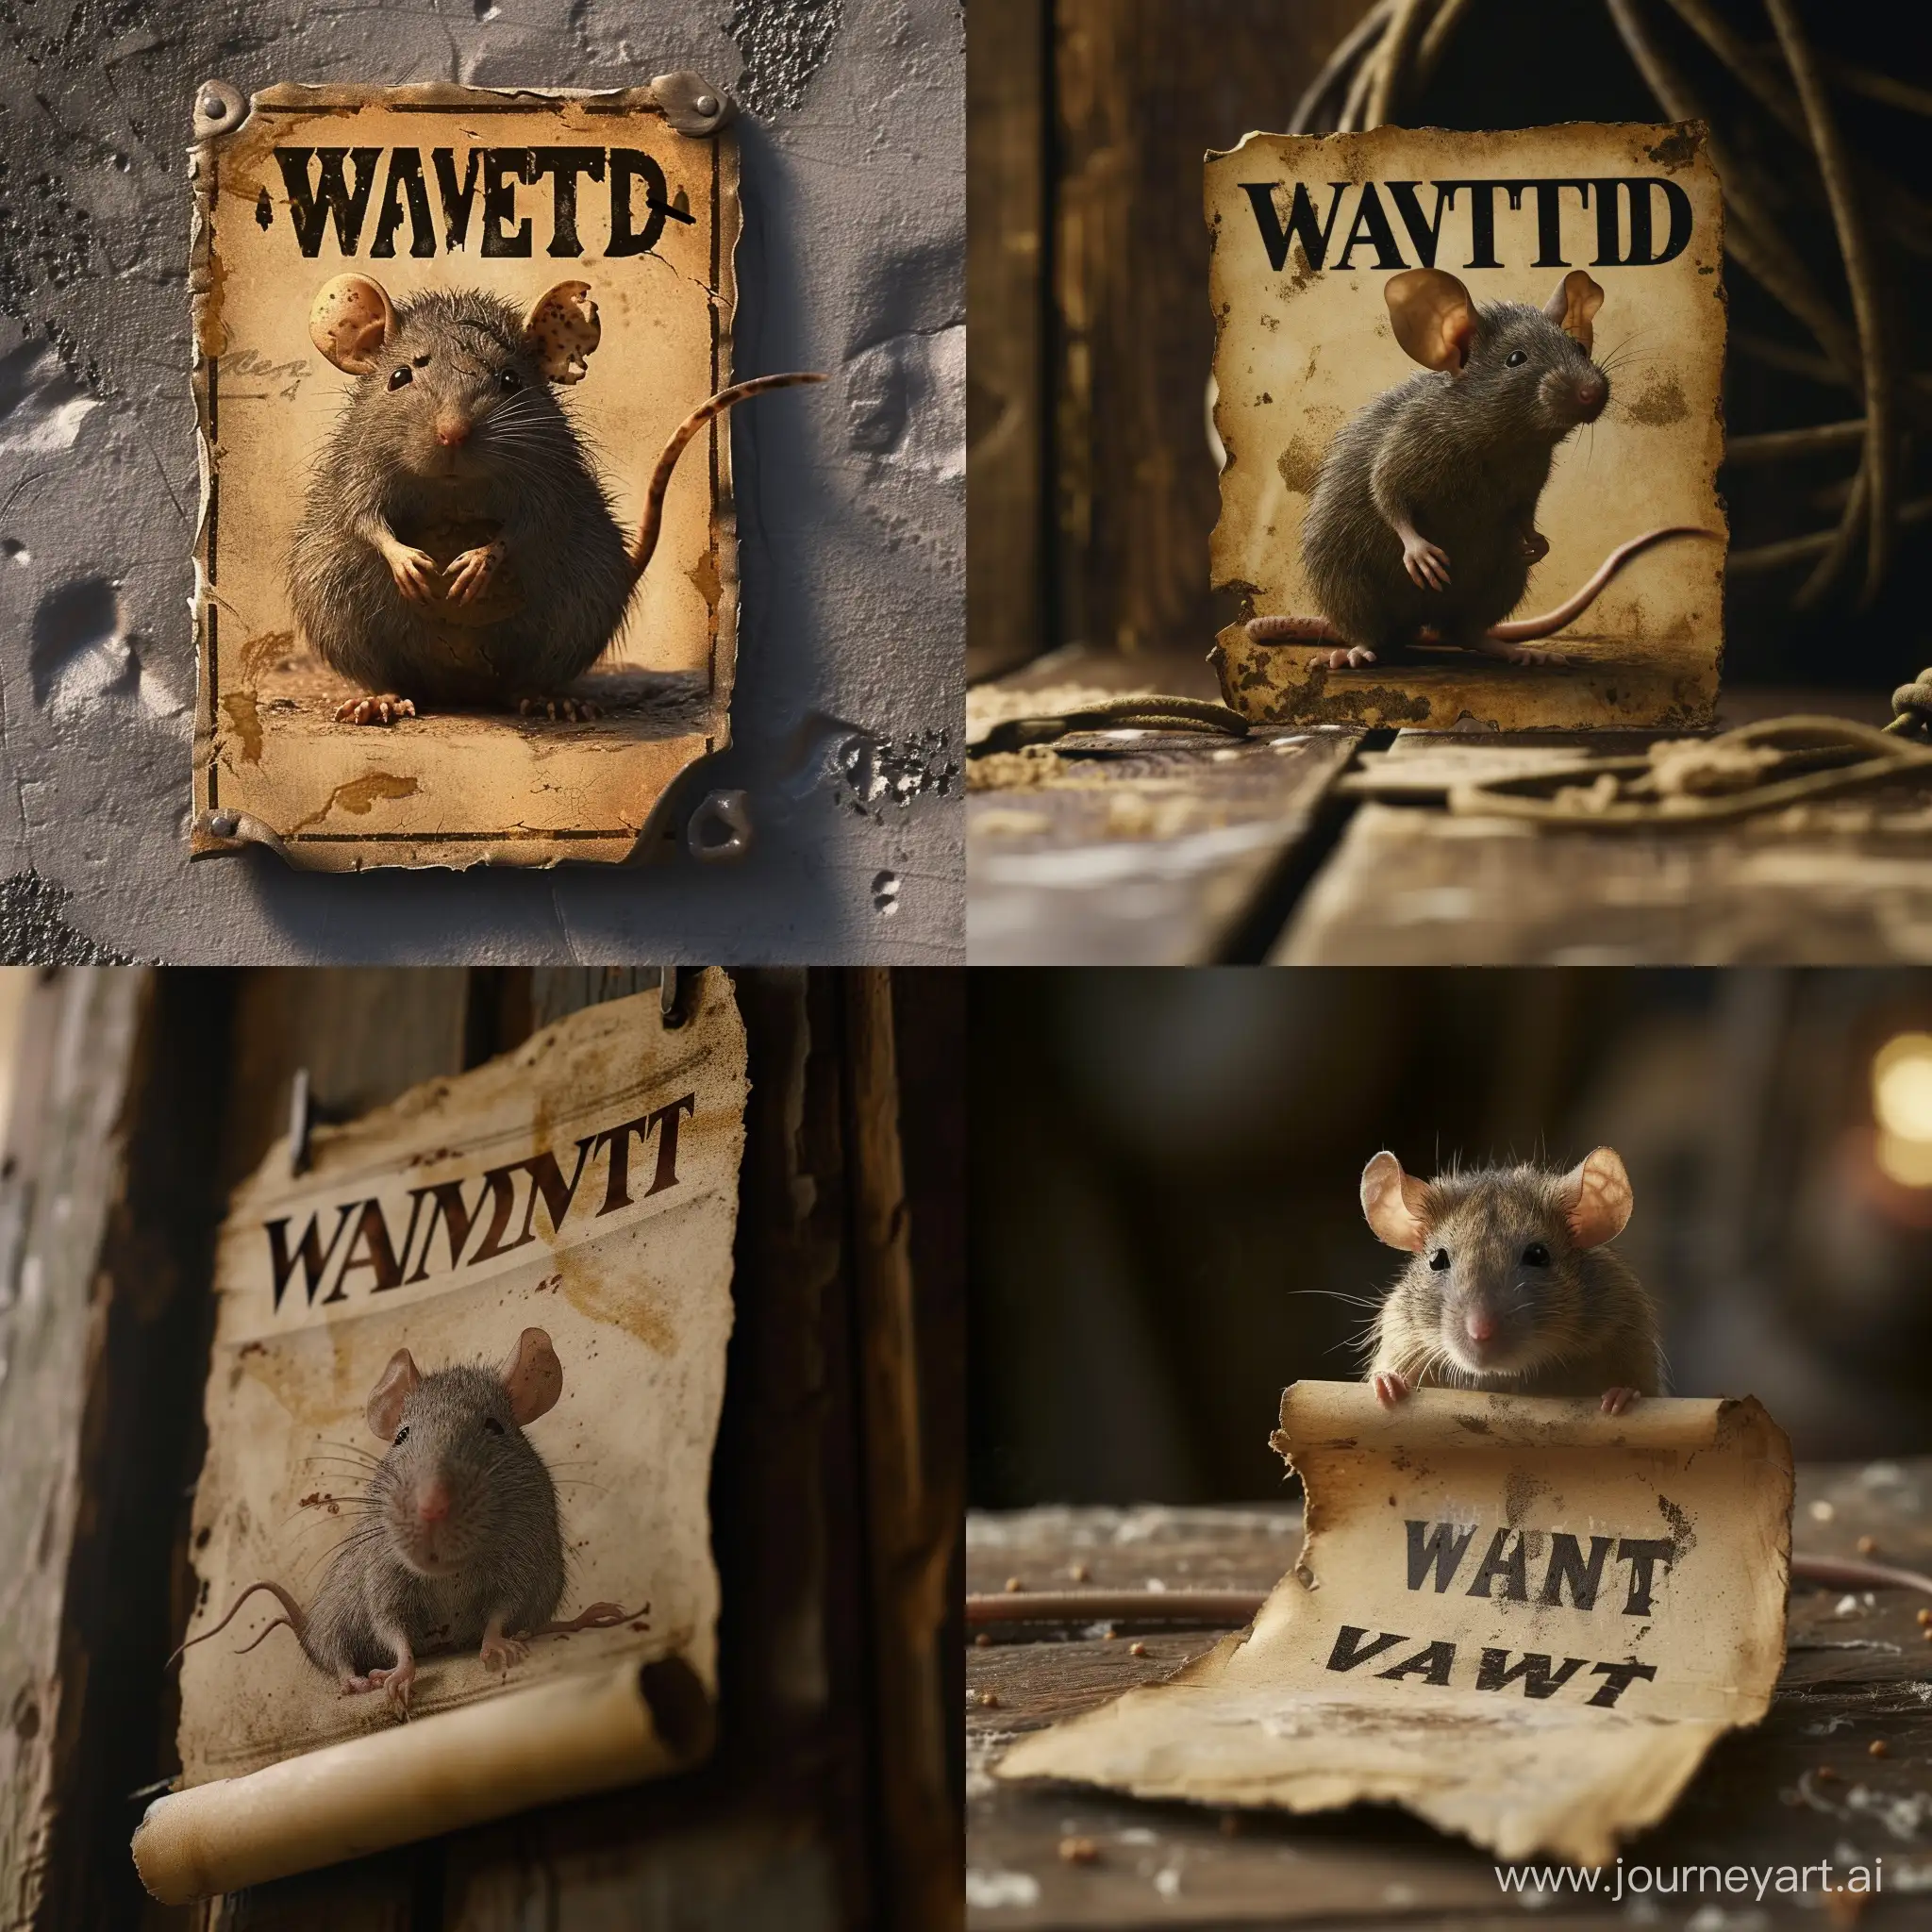 Wanted-Poster-Featuring-a-BattleScarred-Rat